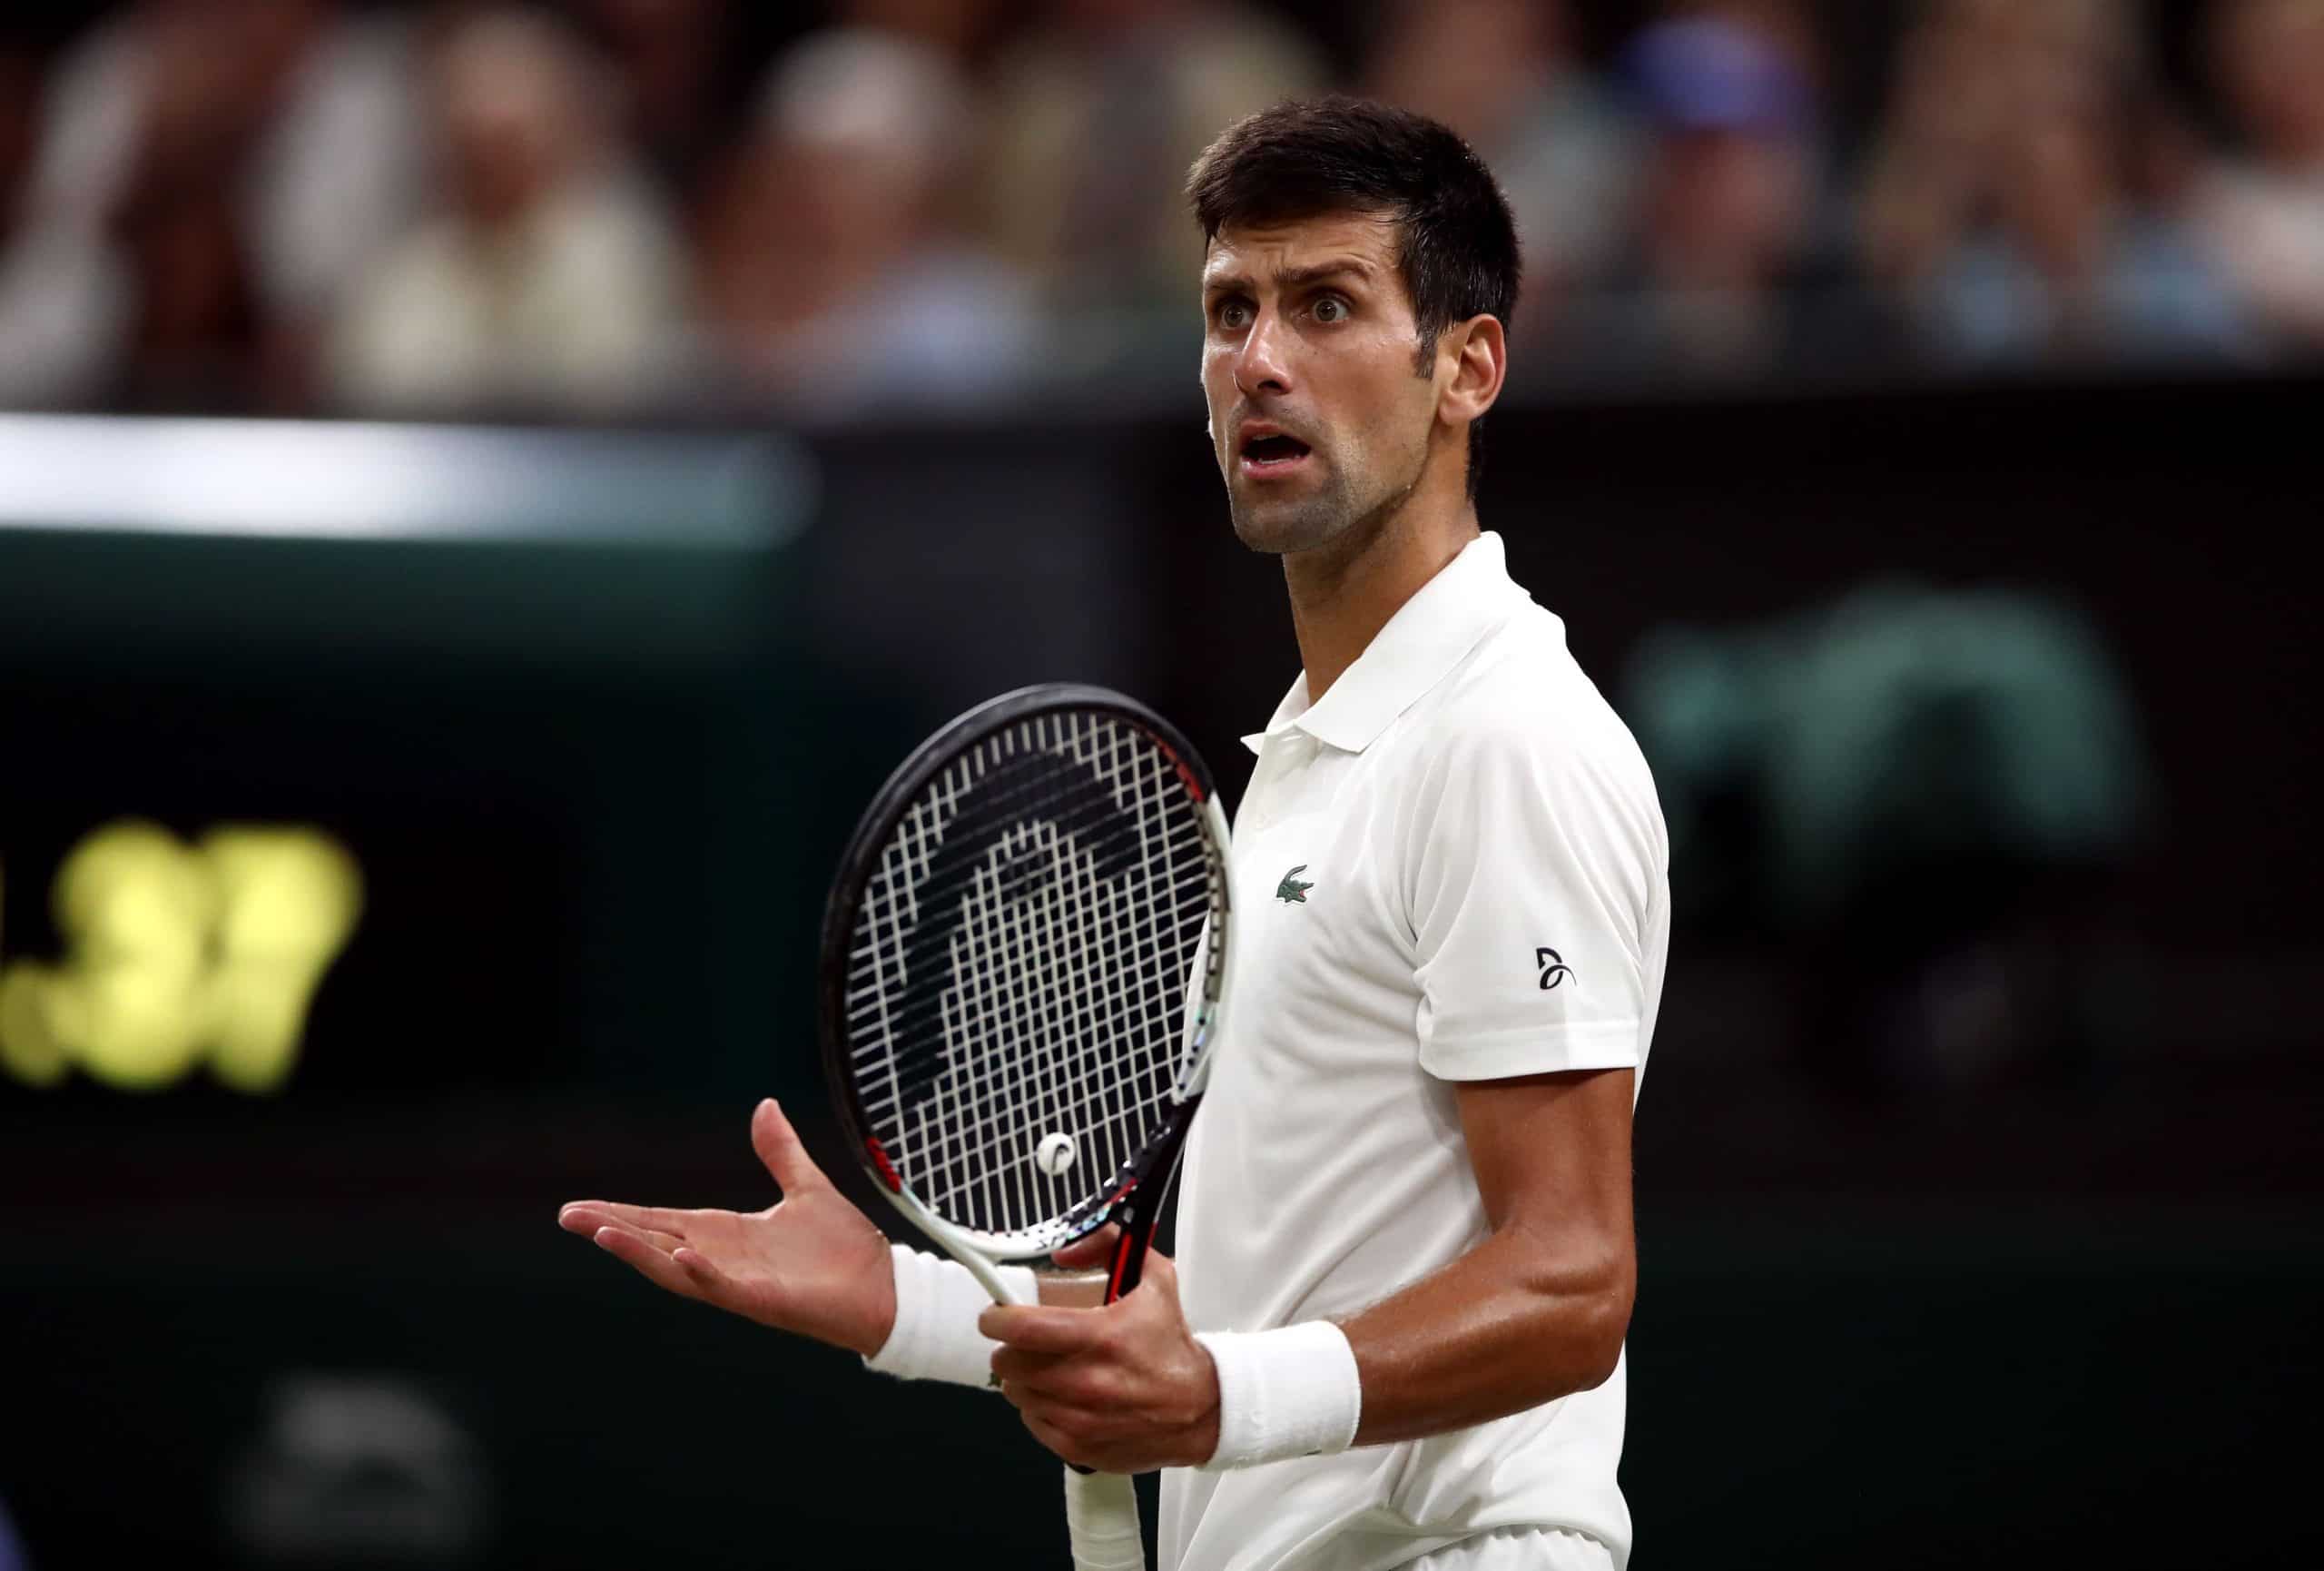 Djokovic admits attending interview after testing positive for Covid